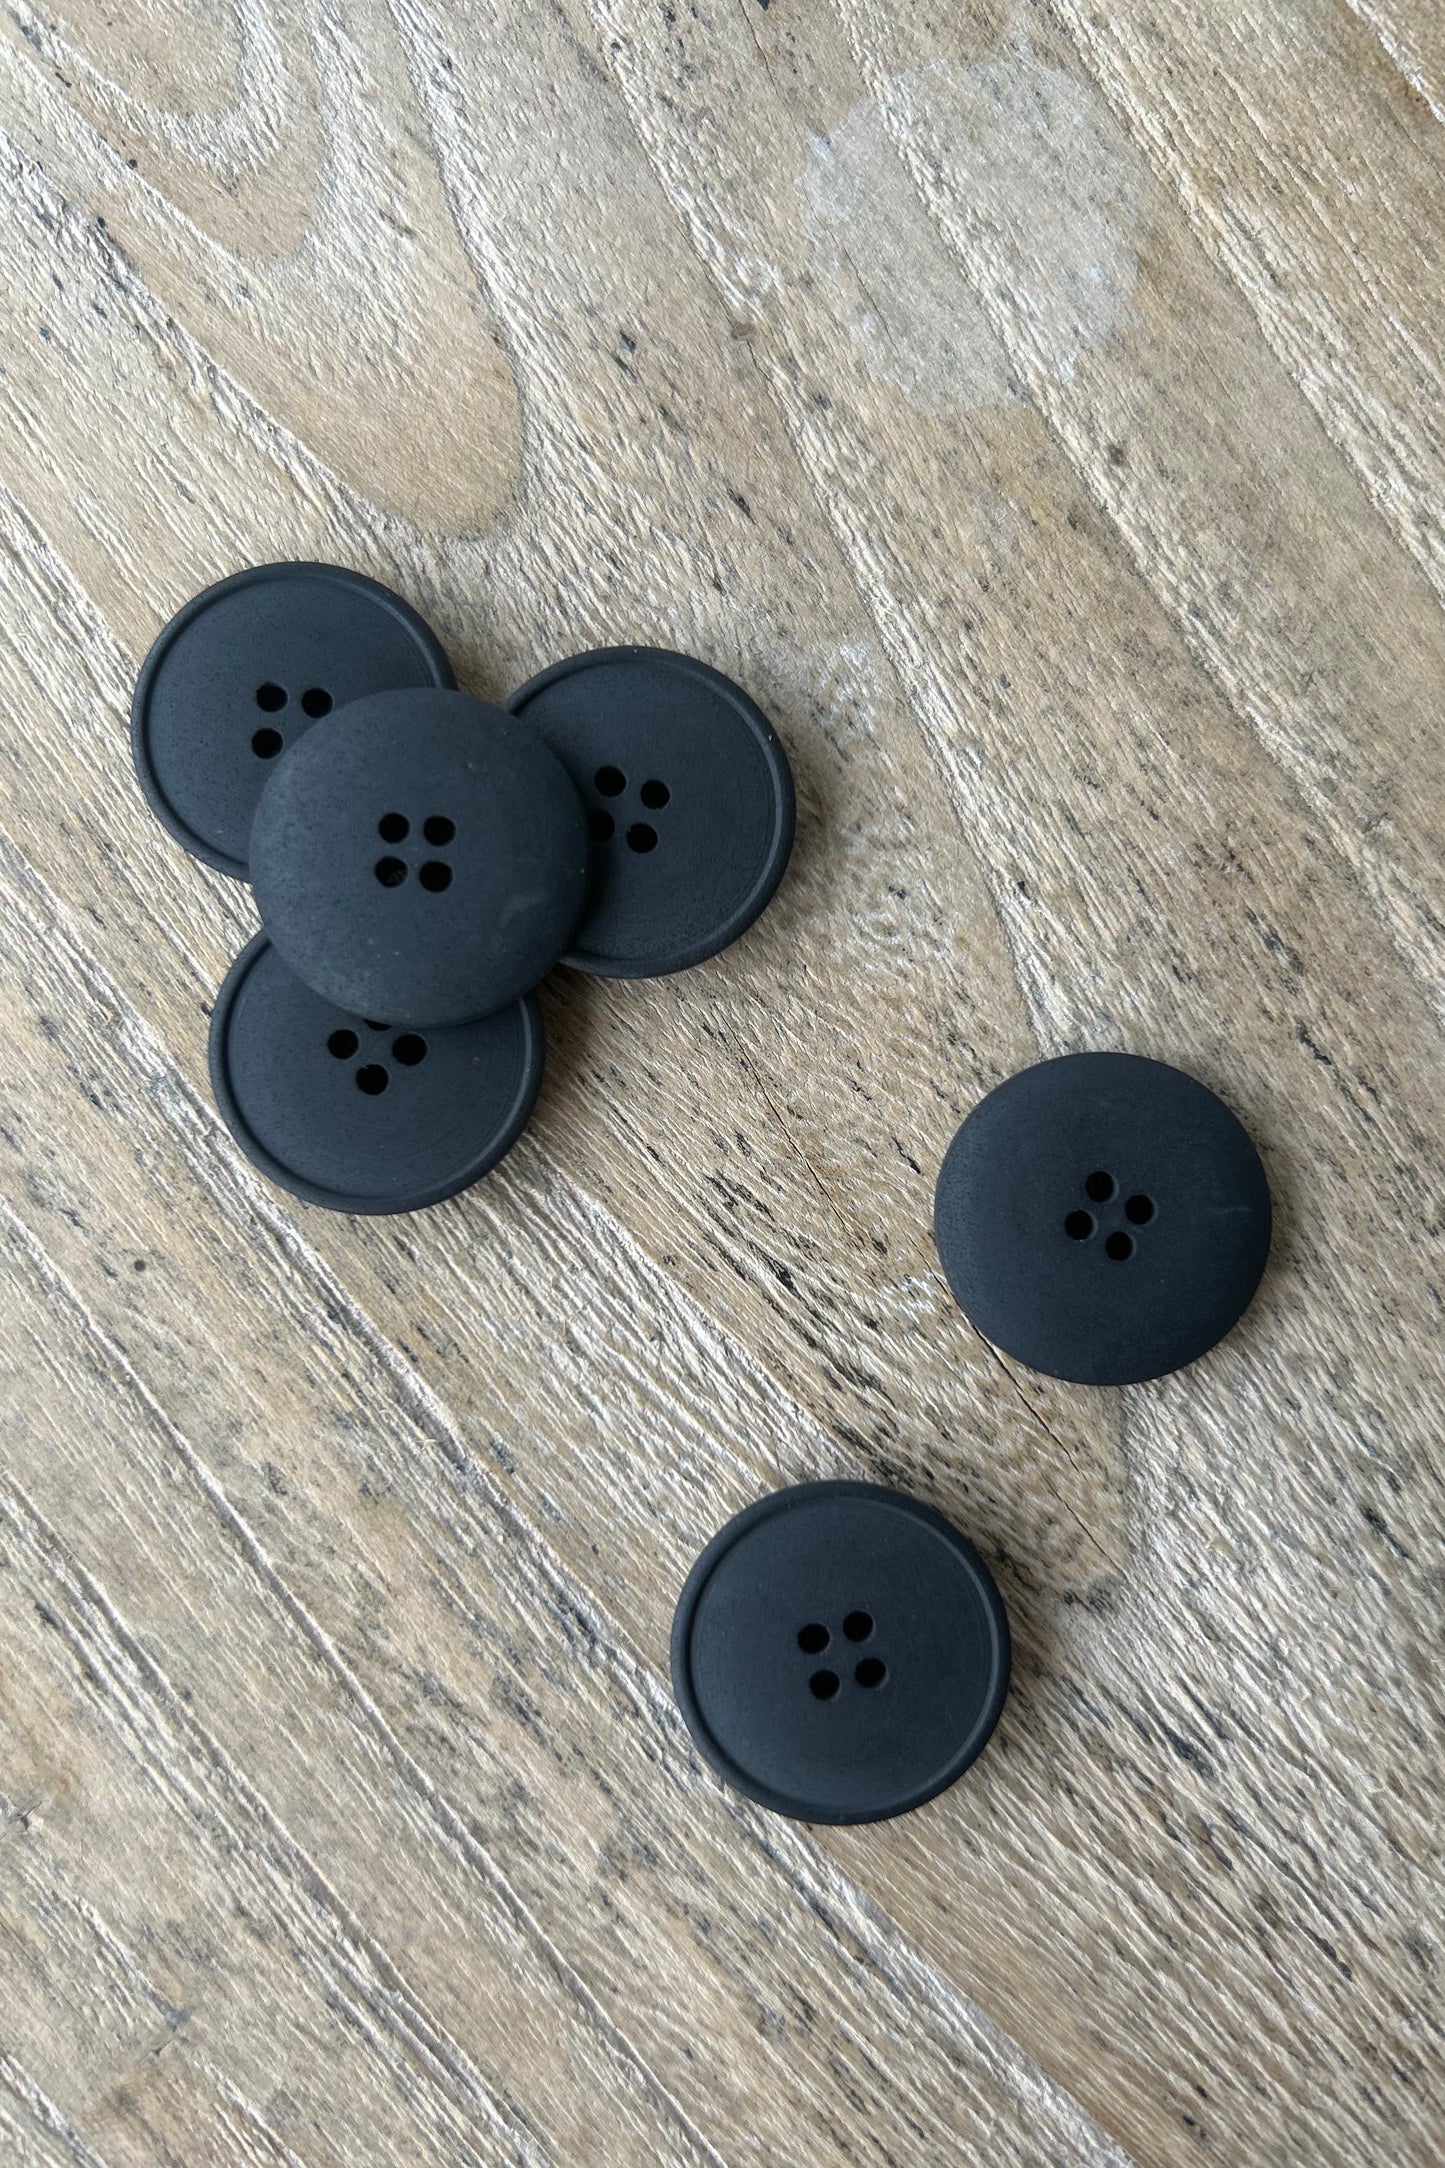 Collection of 20mm black hemp buttons on wood